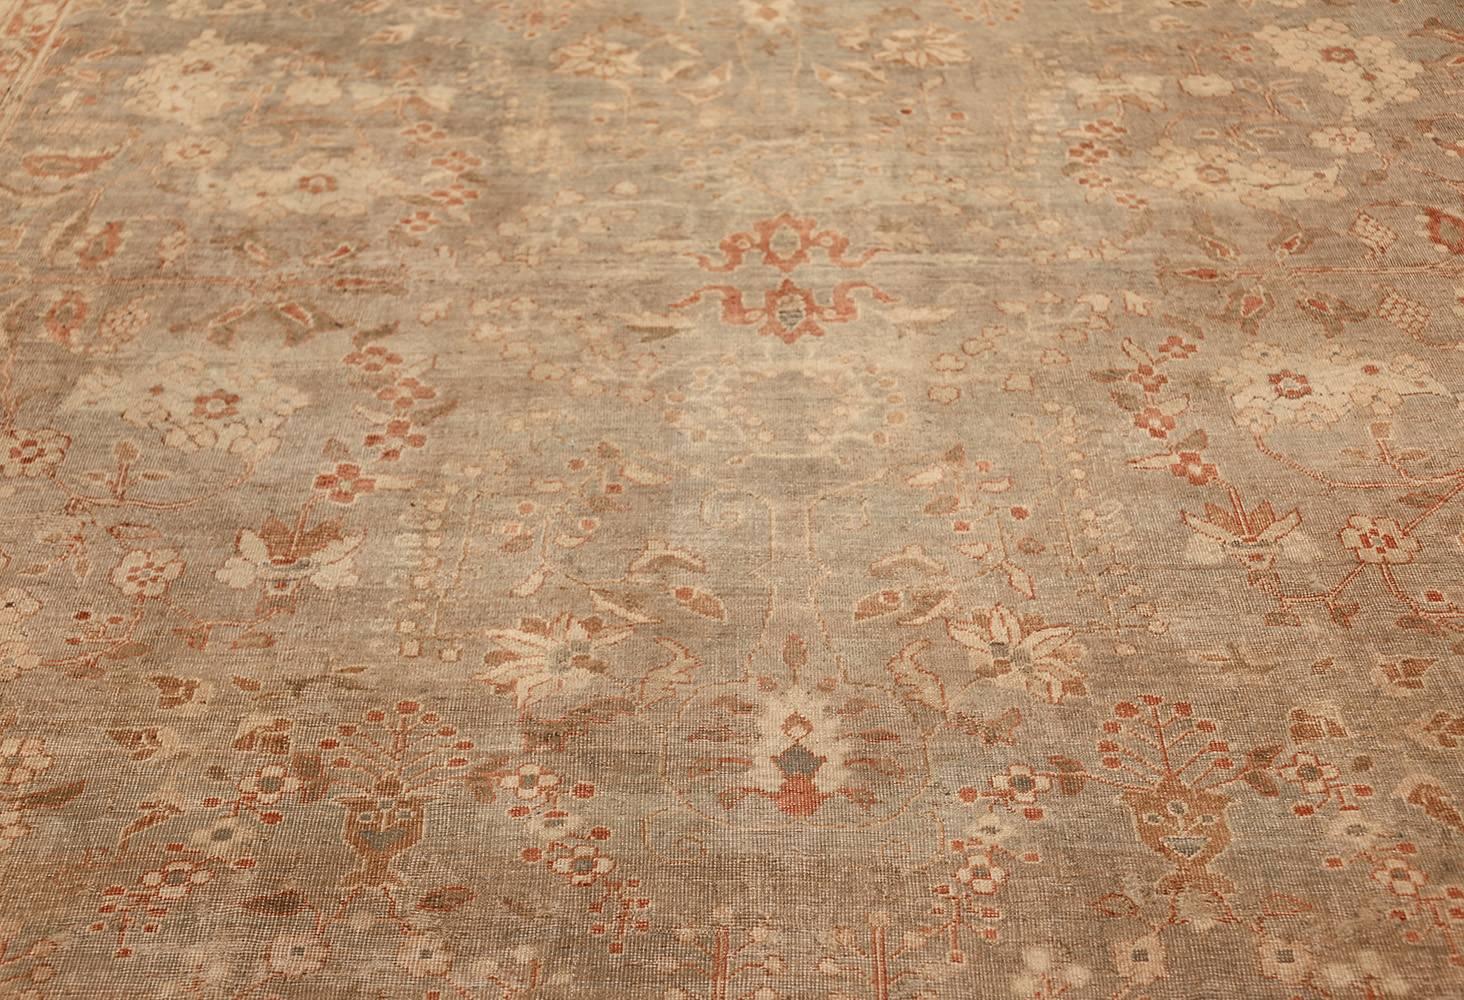 Beautiful Gray Background Antique Khorassan Persian Rug, Country of Origin / Rug Type: Persian Rug, Circa Rug: 1900 – Size: 9 ft 4 in x 11 ft 10 in (2.84 m x 3.61 m).